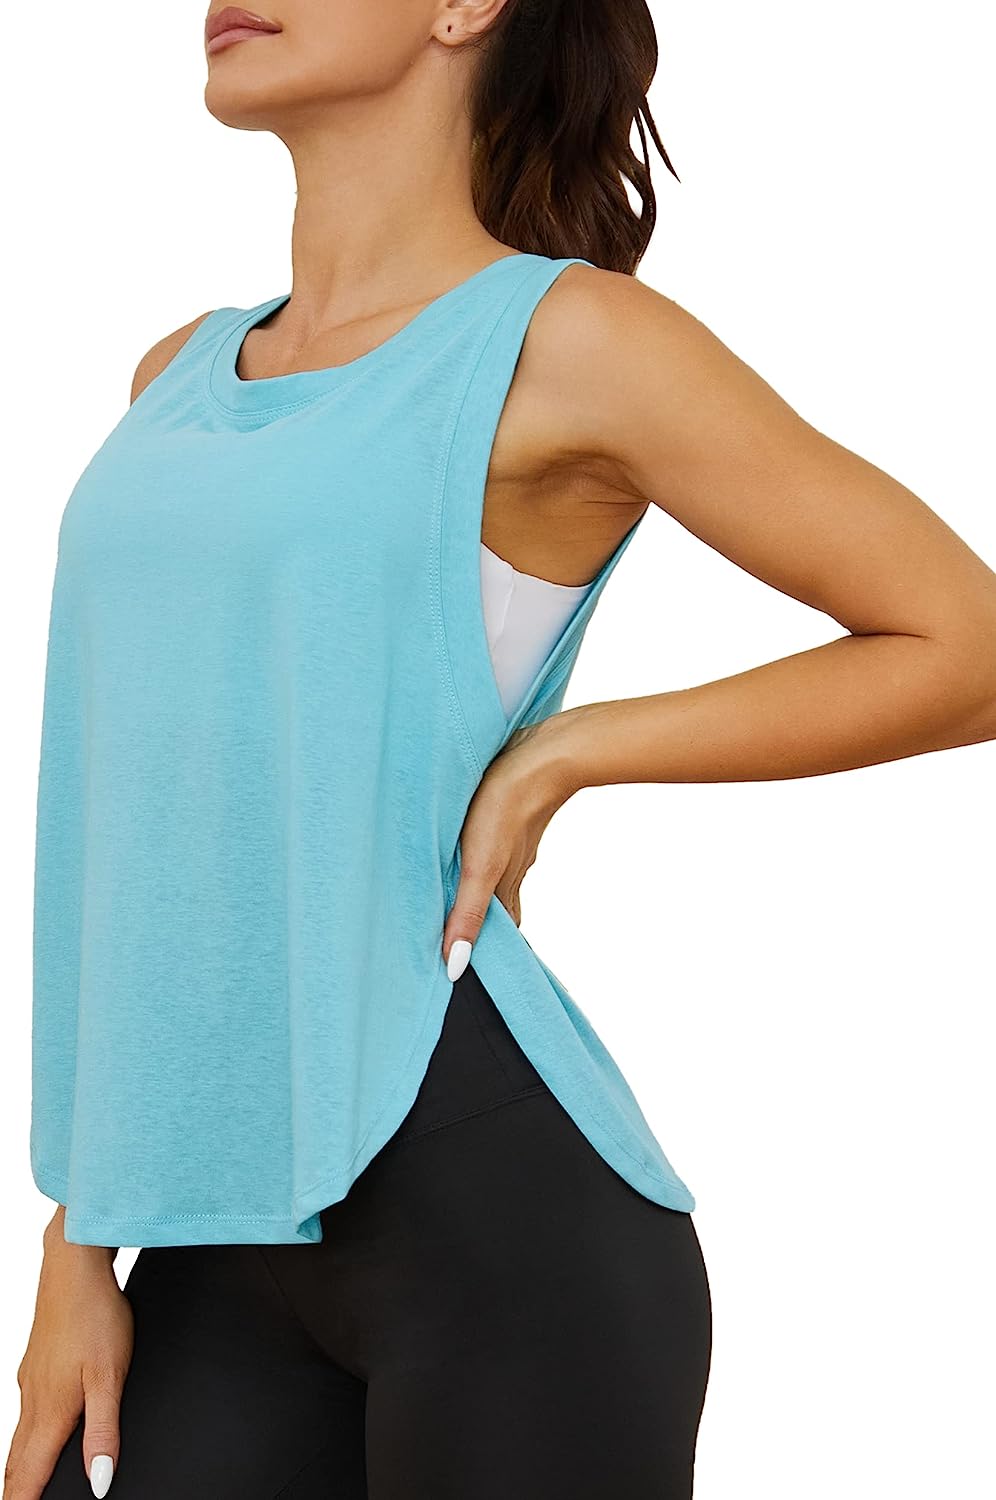 Cotton Athletic Workout Tank Tops for Women - Sleeveless Loose